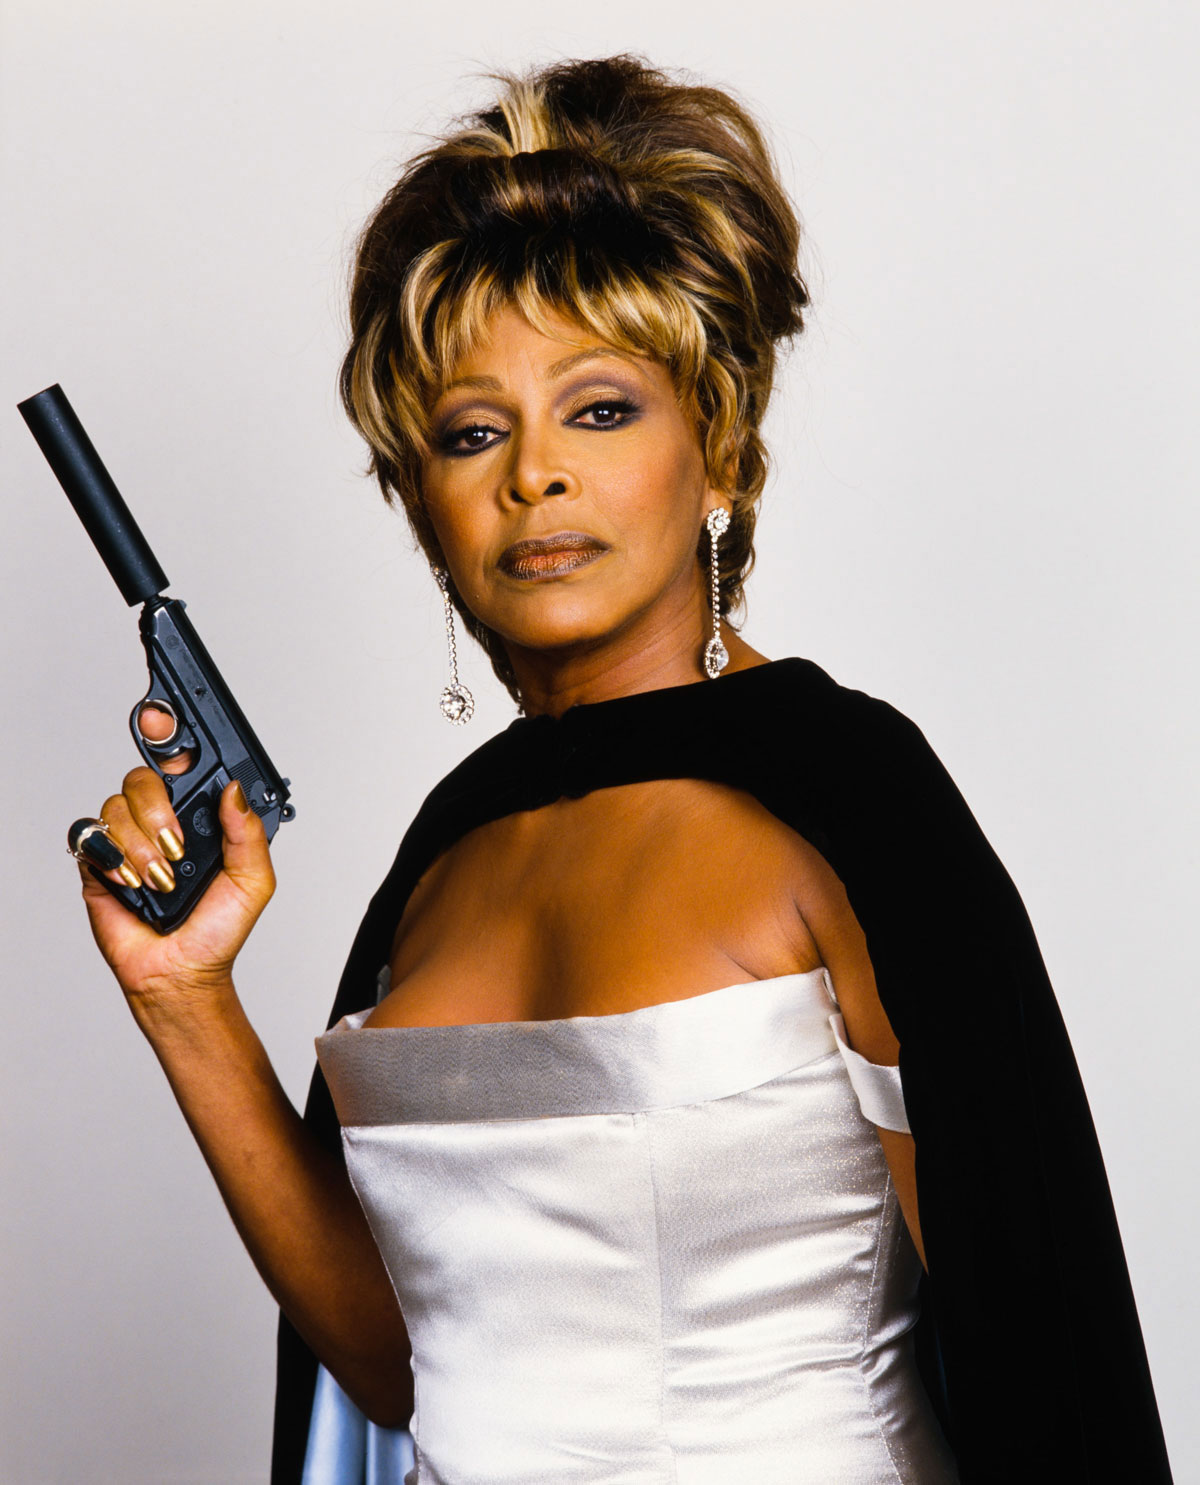 Tina Turner in a publicity shoot for the Bond film Goldeneye